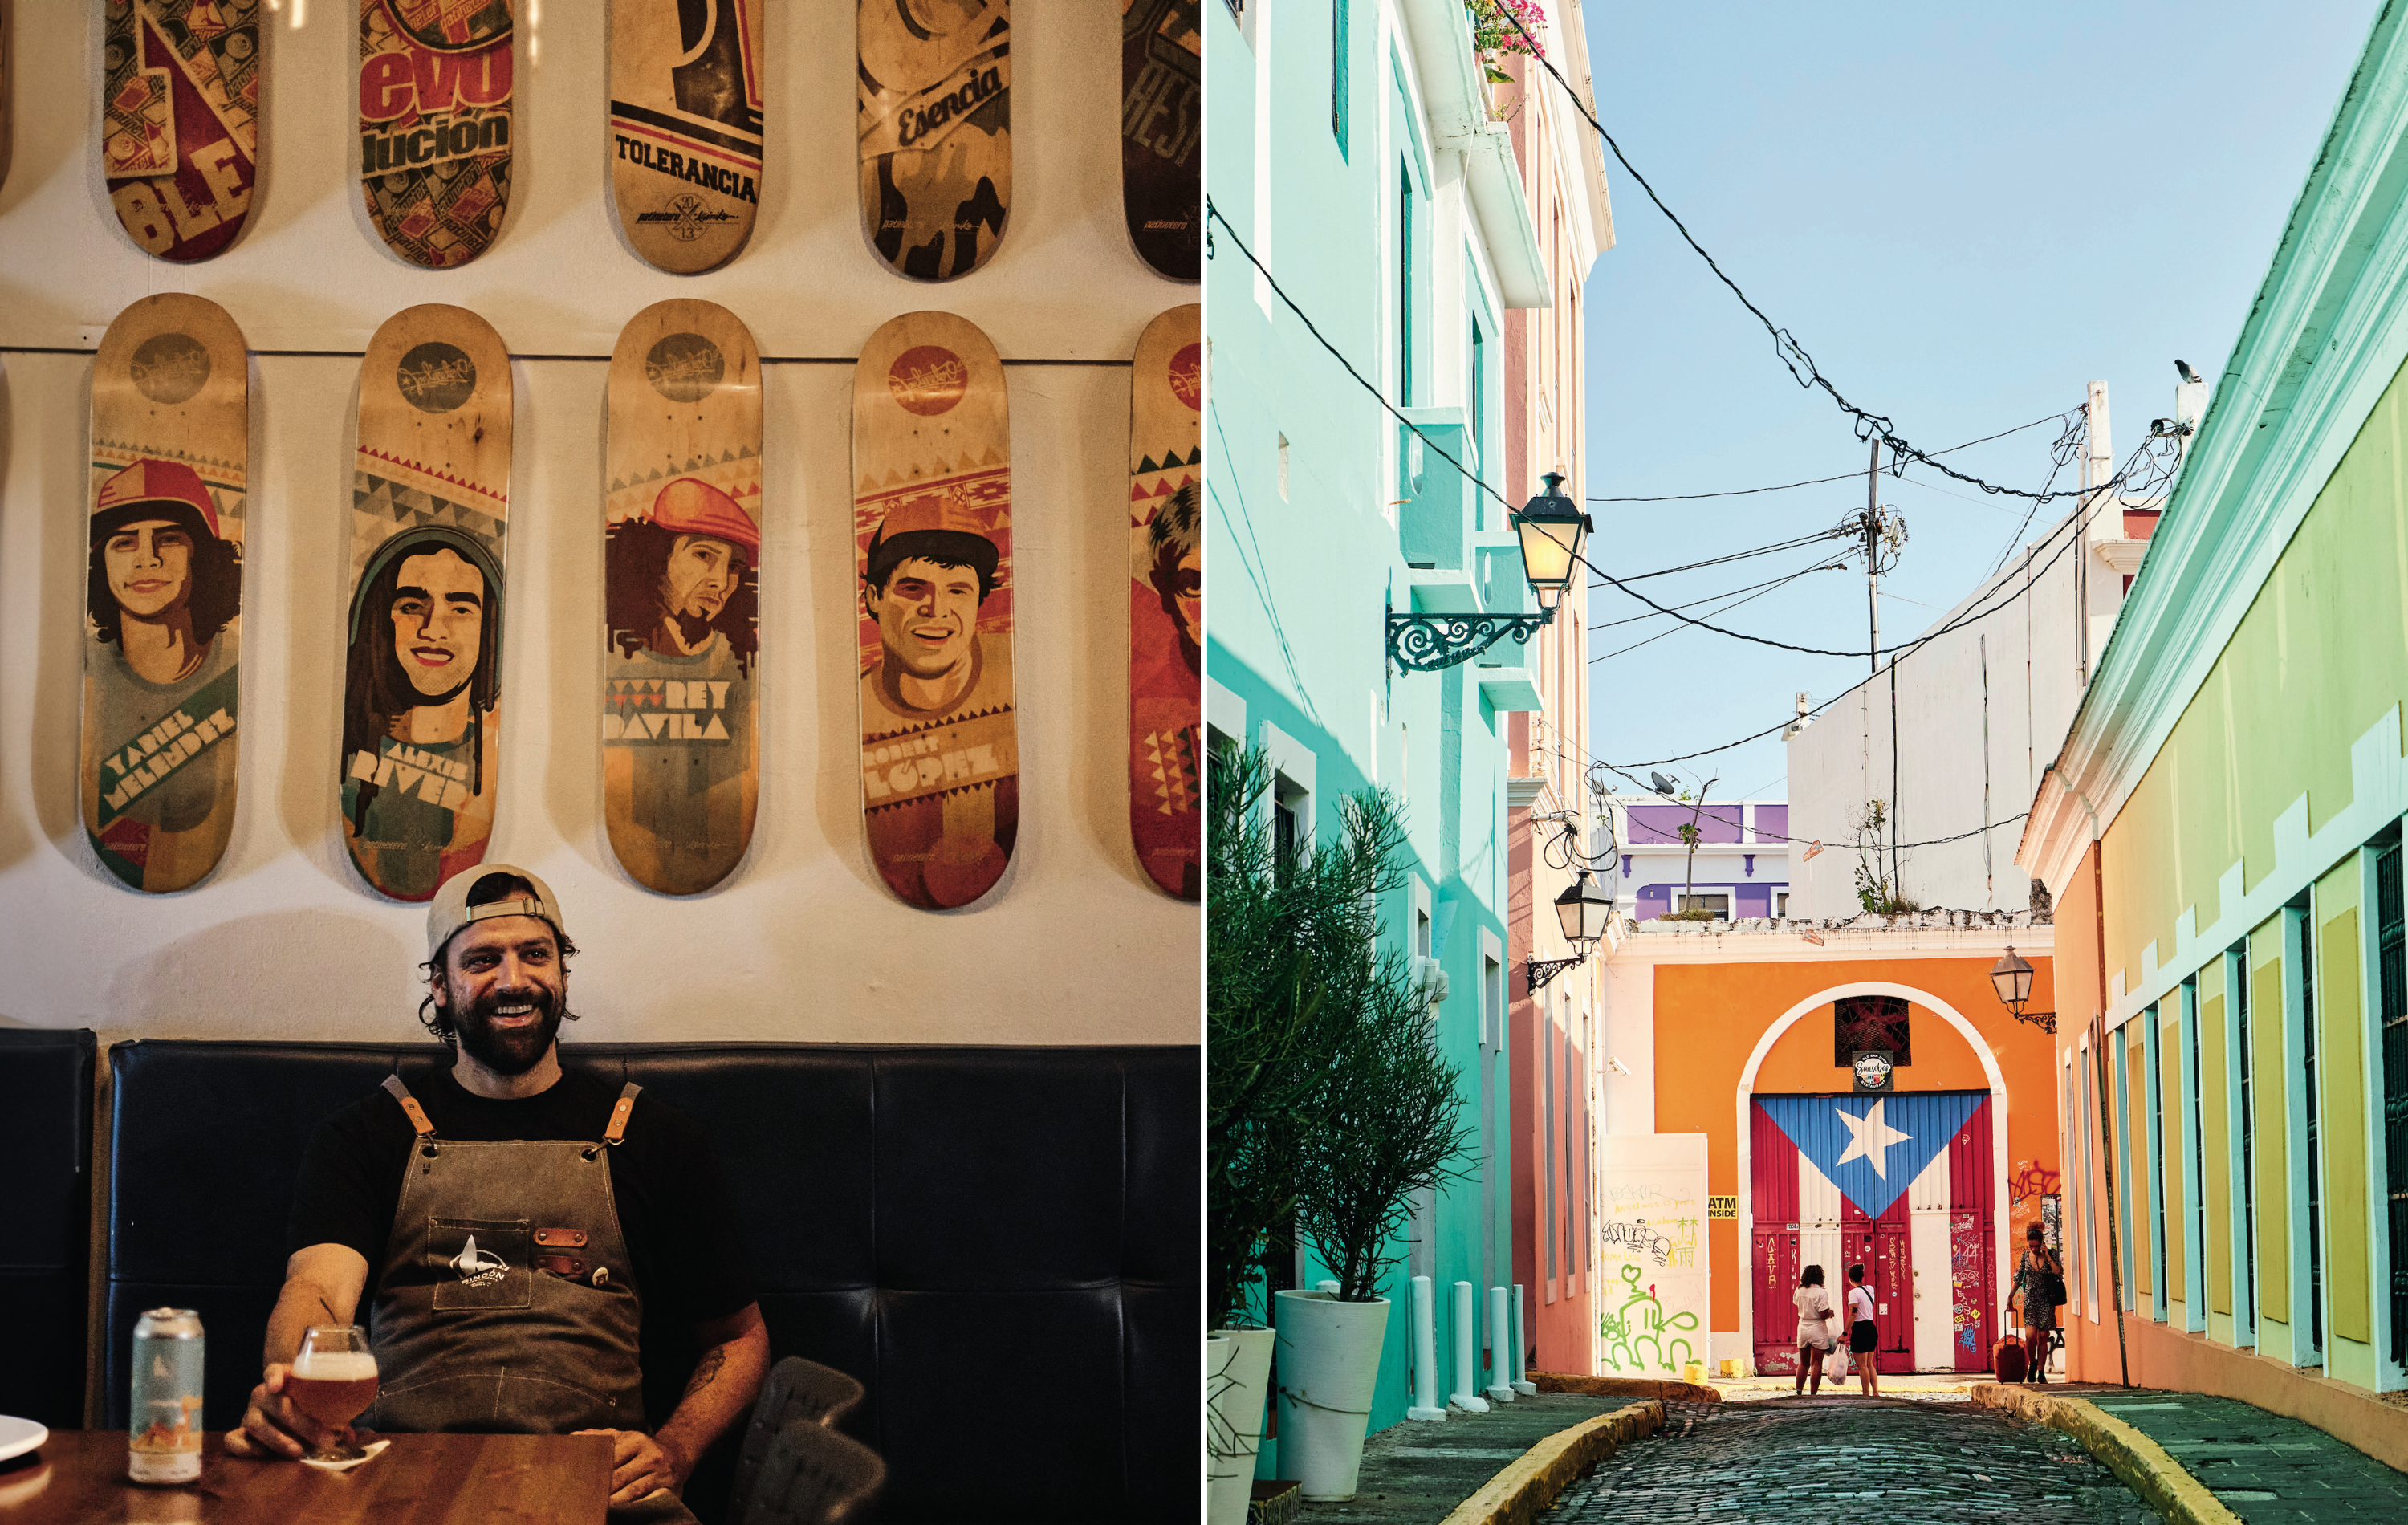 A collage of two images. Left: A man sits in a booth with a glass of beer; he is wearing overalls and a hat. Above him, there are skateboard decks with faces of men. Right: A colorful streetscape; three people walk in the middle, where there is a Puerto Rican flag painted on one building.